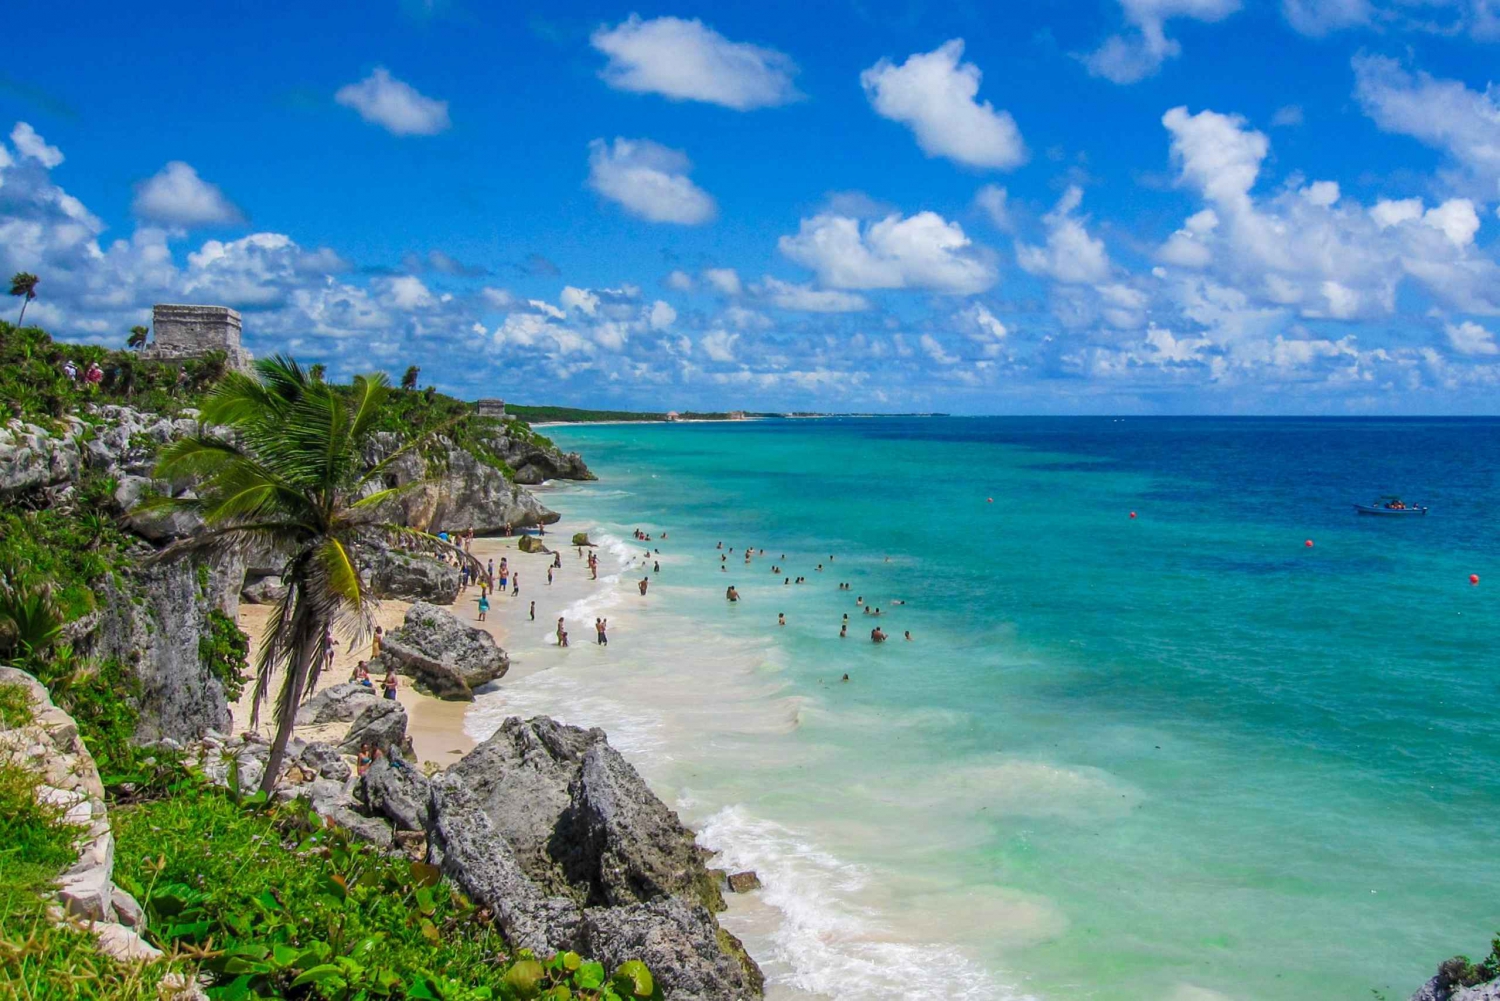 From Playa Del Carmen: Tulum, Mayan Culture and Cenote Tour